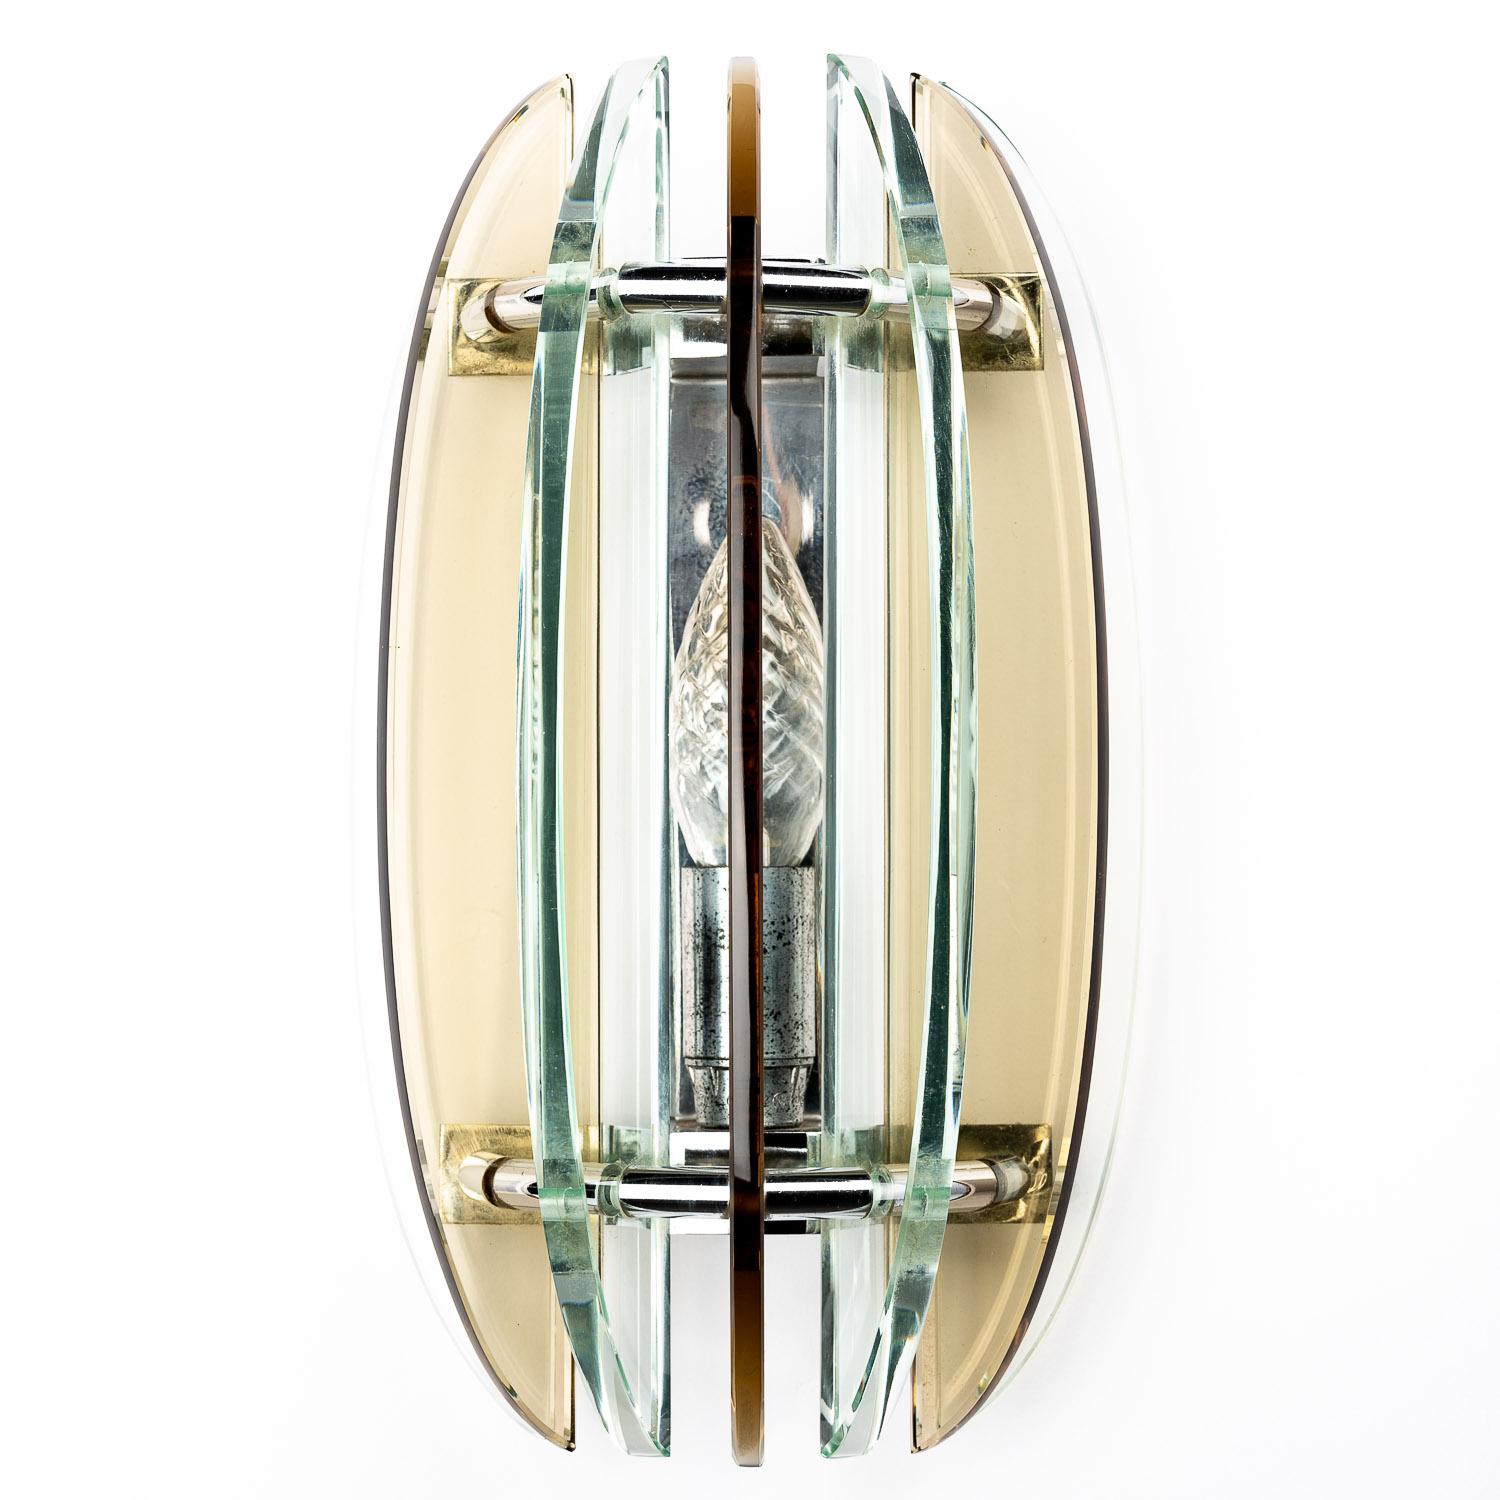 Italian 1970s Glass and Metal Walls Light by Veca For Sale